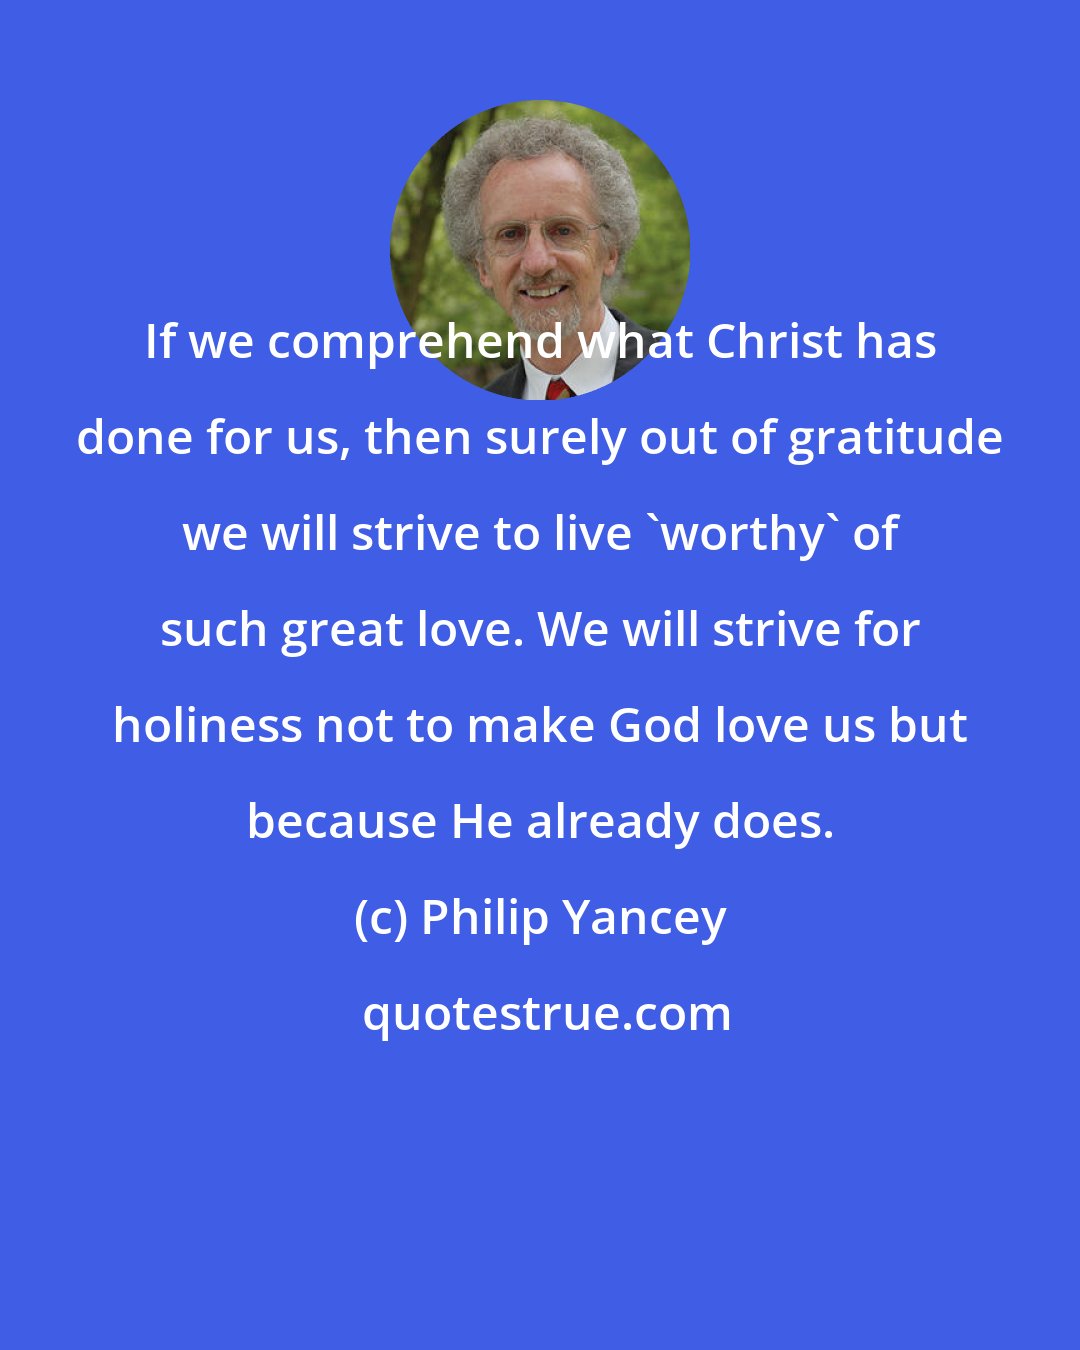 Philip Yancey: If we comprehend what Christ has done for us, then surely out of gratitude we will strive to live 'worthy' of such great love. We will strive for holiness not to make God love us but because He already does.